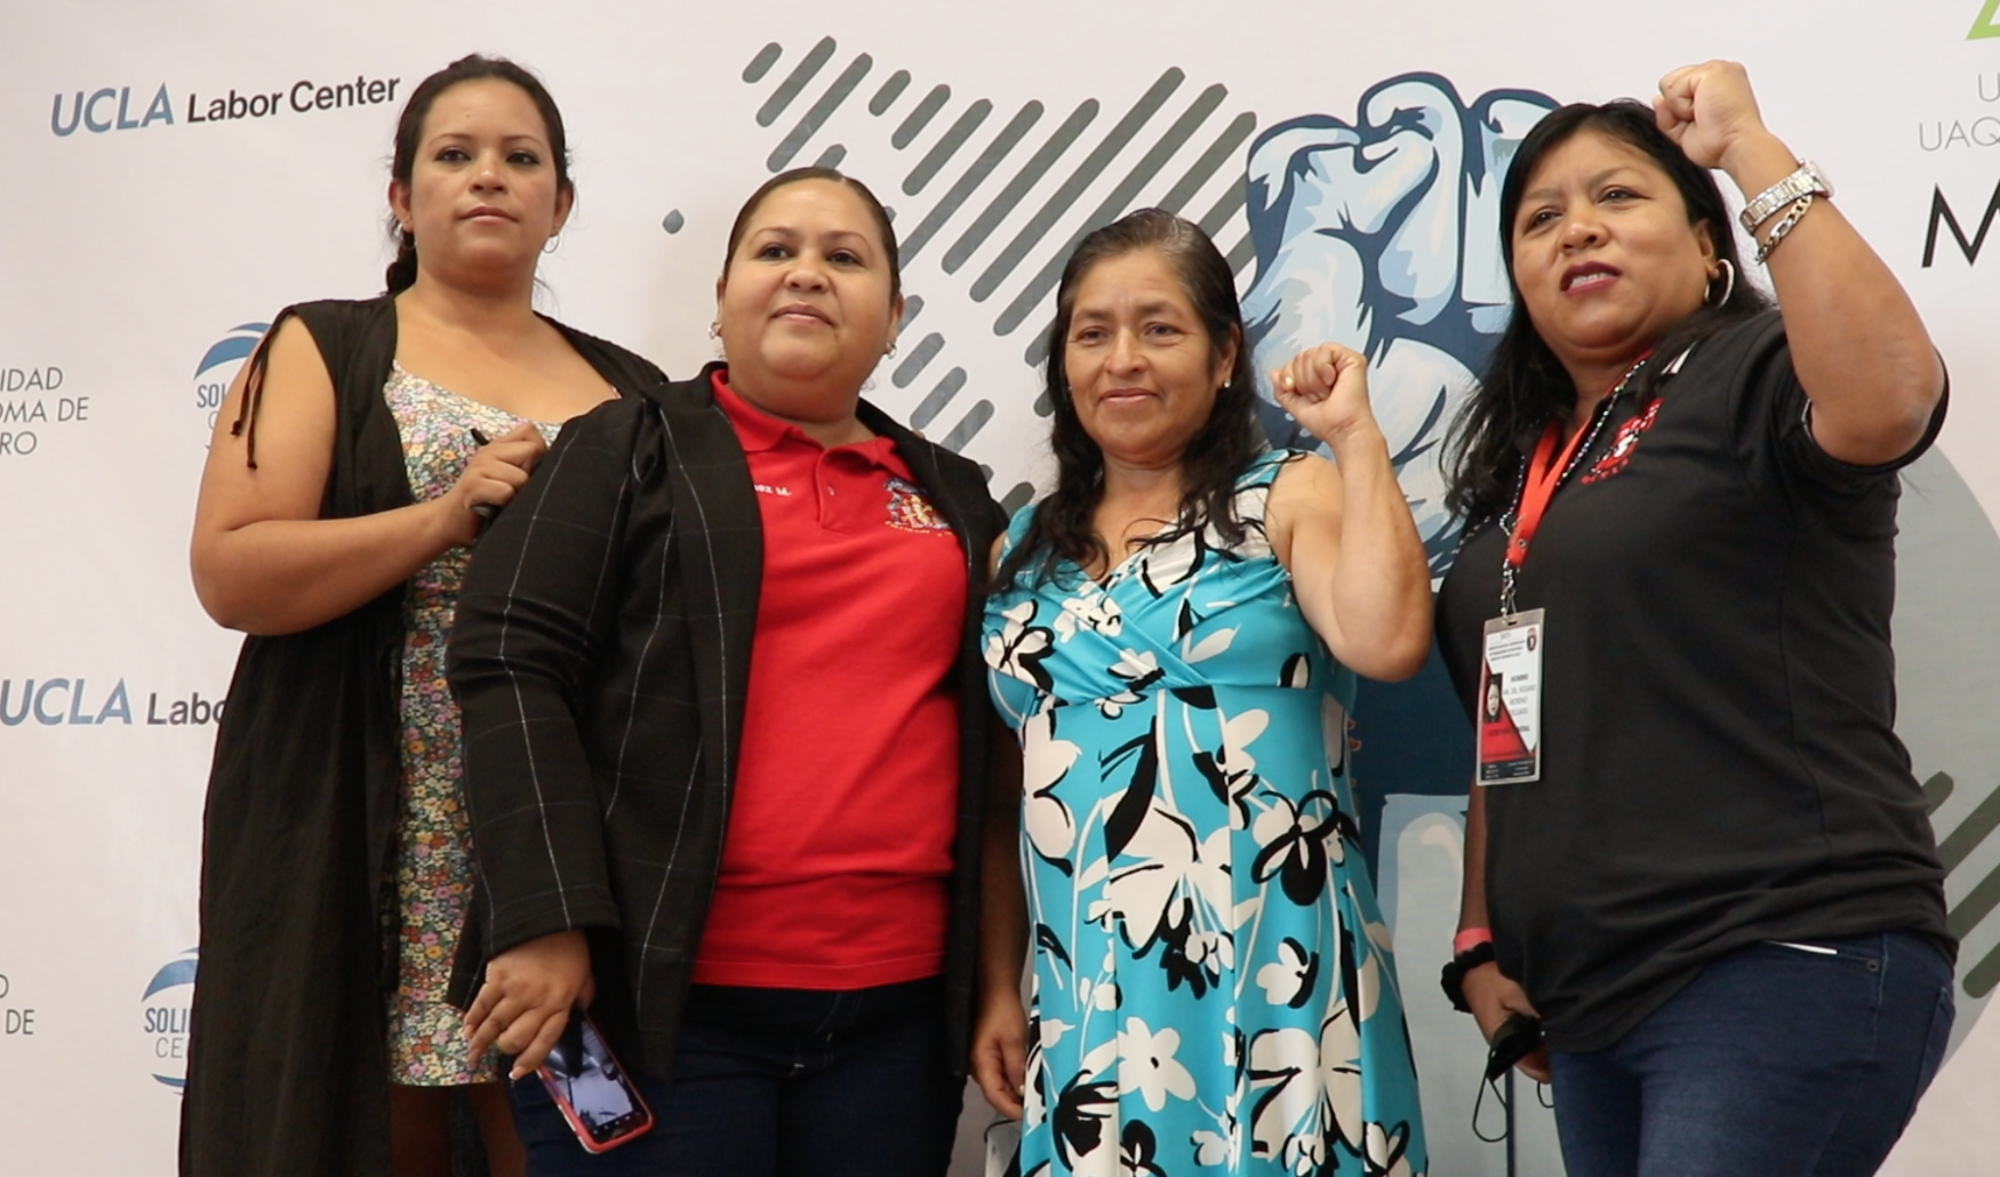 Four women stand and smile in front of a backdrop, two with raised fists.